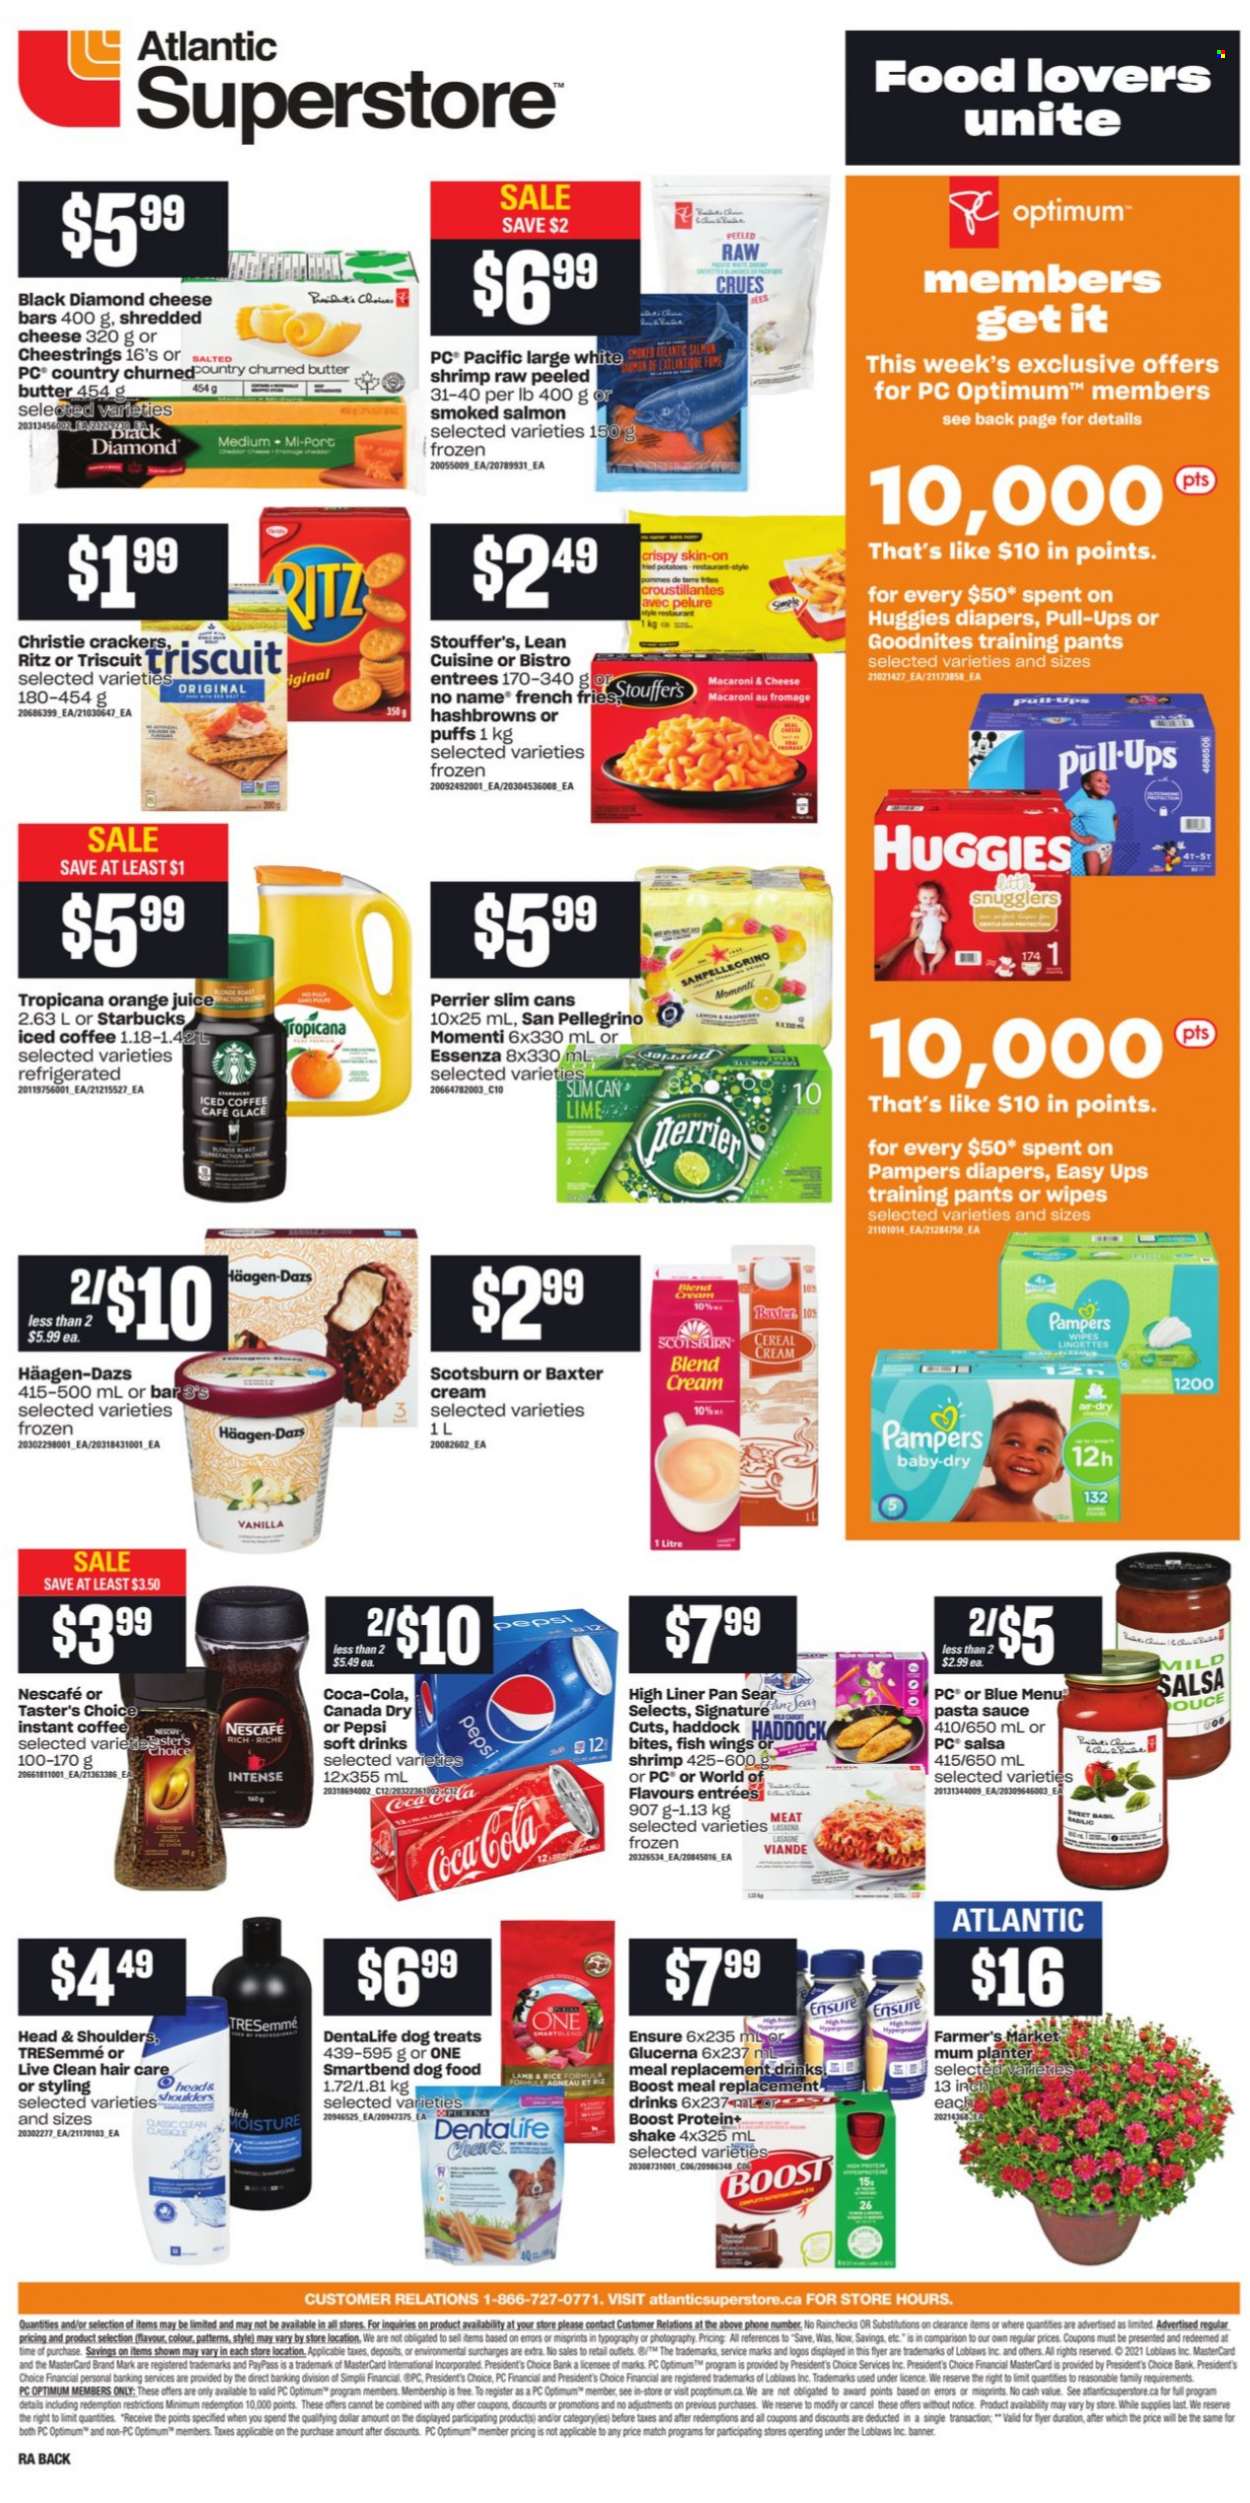 thumbnail - Atlantic Superstore Flyer - September 23, 2021 - September 29, 2021 - Sales products - puffs, potatoes, smoked salmon, haddock, fish, shrimps, No Name, macaroni & cheese, pasta sauce, sauce, lasagna meal, Lean Cuisine, shredded cheese, string cheese, Président, shake, butter, Häagen-Dazs, Stouffer's, hash browns, potato fries, french fries, crackers, RITZ, cereals, salsa, Canada Dry, Coca-Cola, Pepsi, orange juice, juice, soft drink, Perrier, San Pellegrino, iced coffee, Boost, instant coffee, Starbucks, wipes, pants, nappies, baby pants, TRESemmé, Mum, animal food, dog food, Optimum, Dentalife, Glucerna, Head & Shoulders, Huggies, Pampers, Nescafé. Page 2.